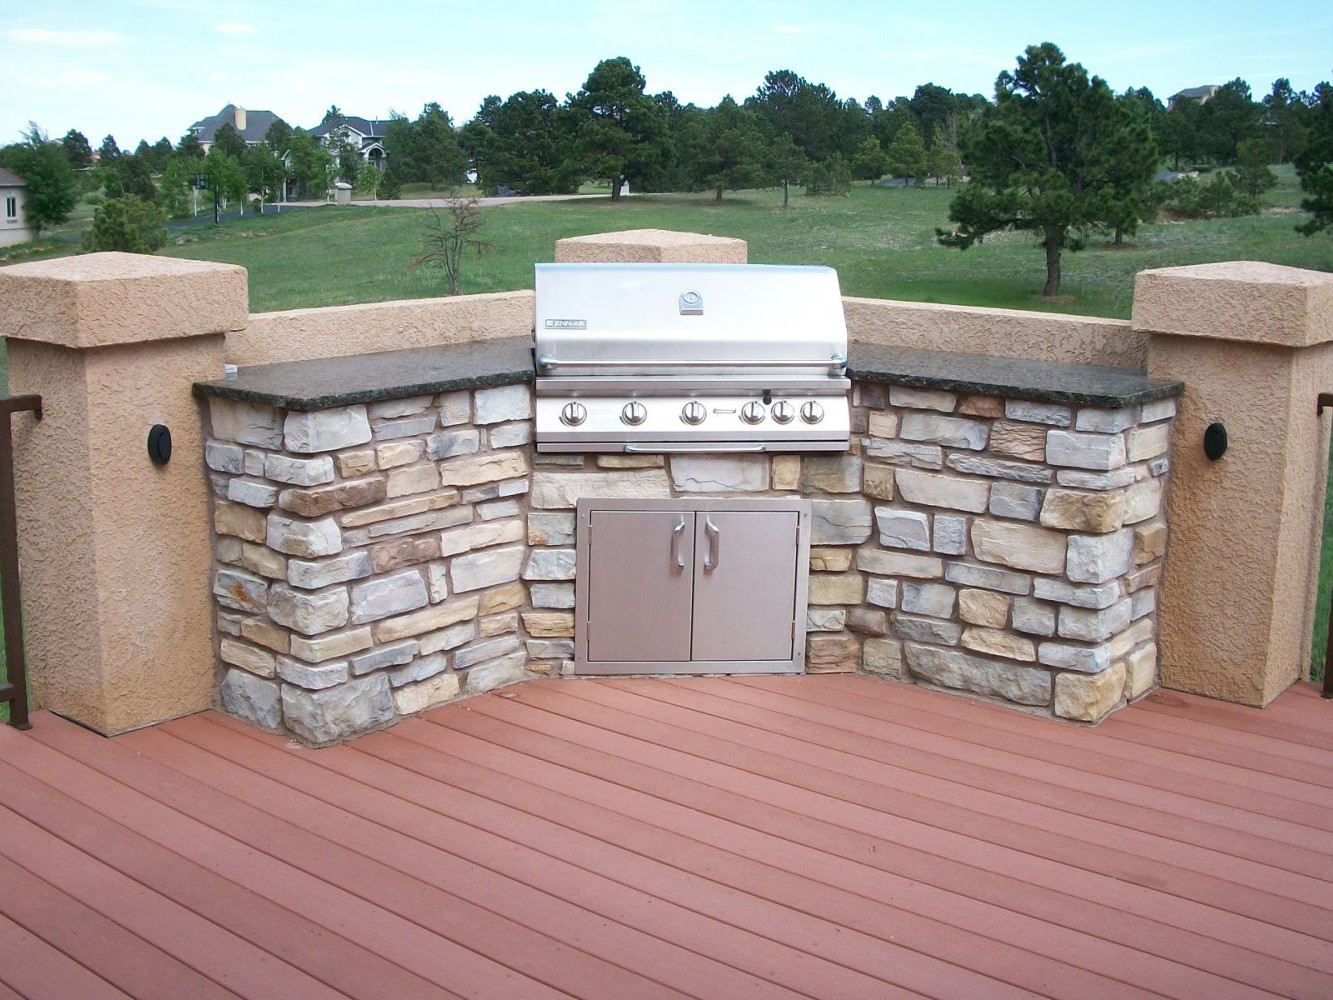 Redwood deck with a grilling/cooking area in one corner. Built with stone and granite countertops